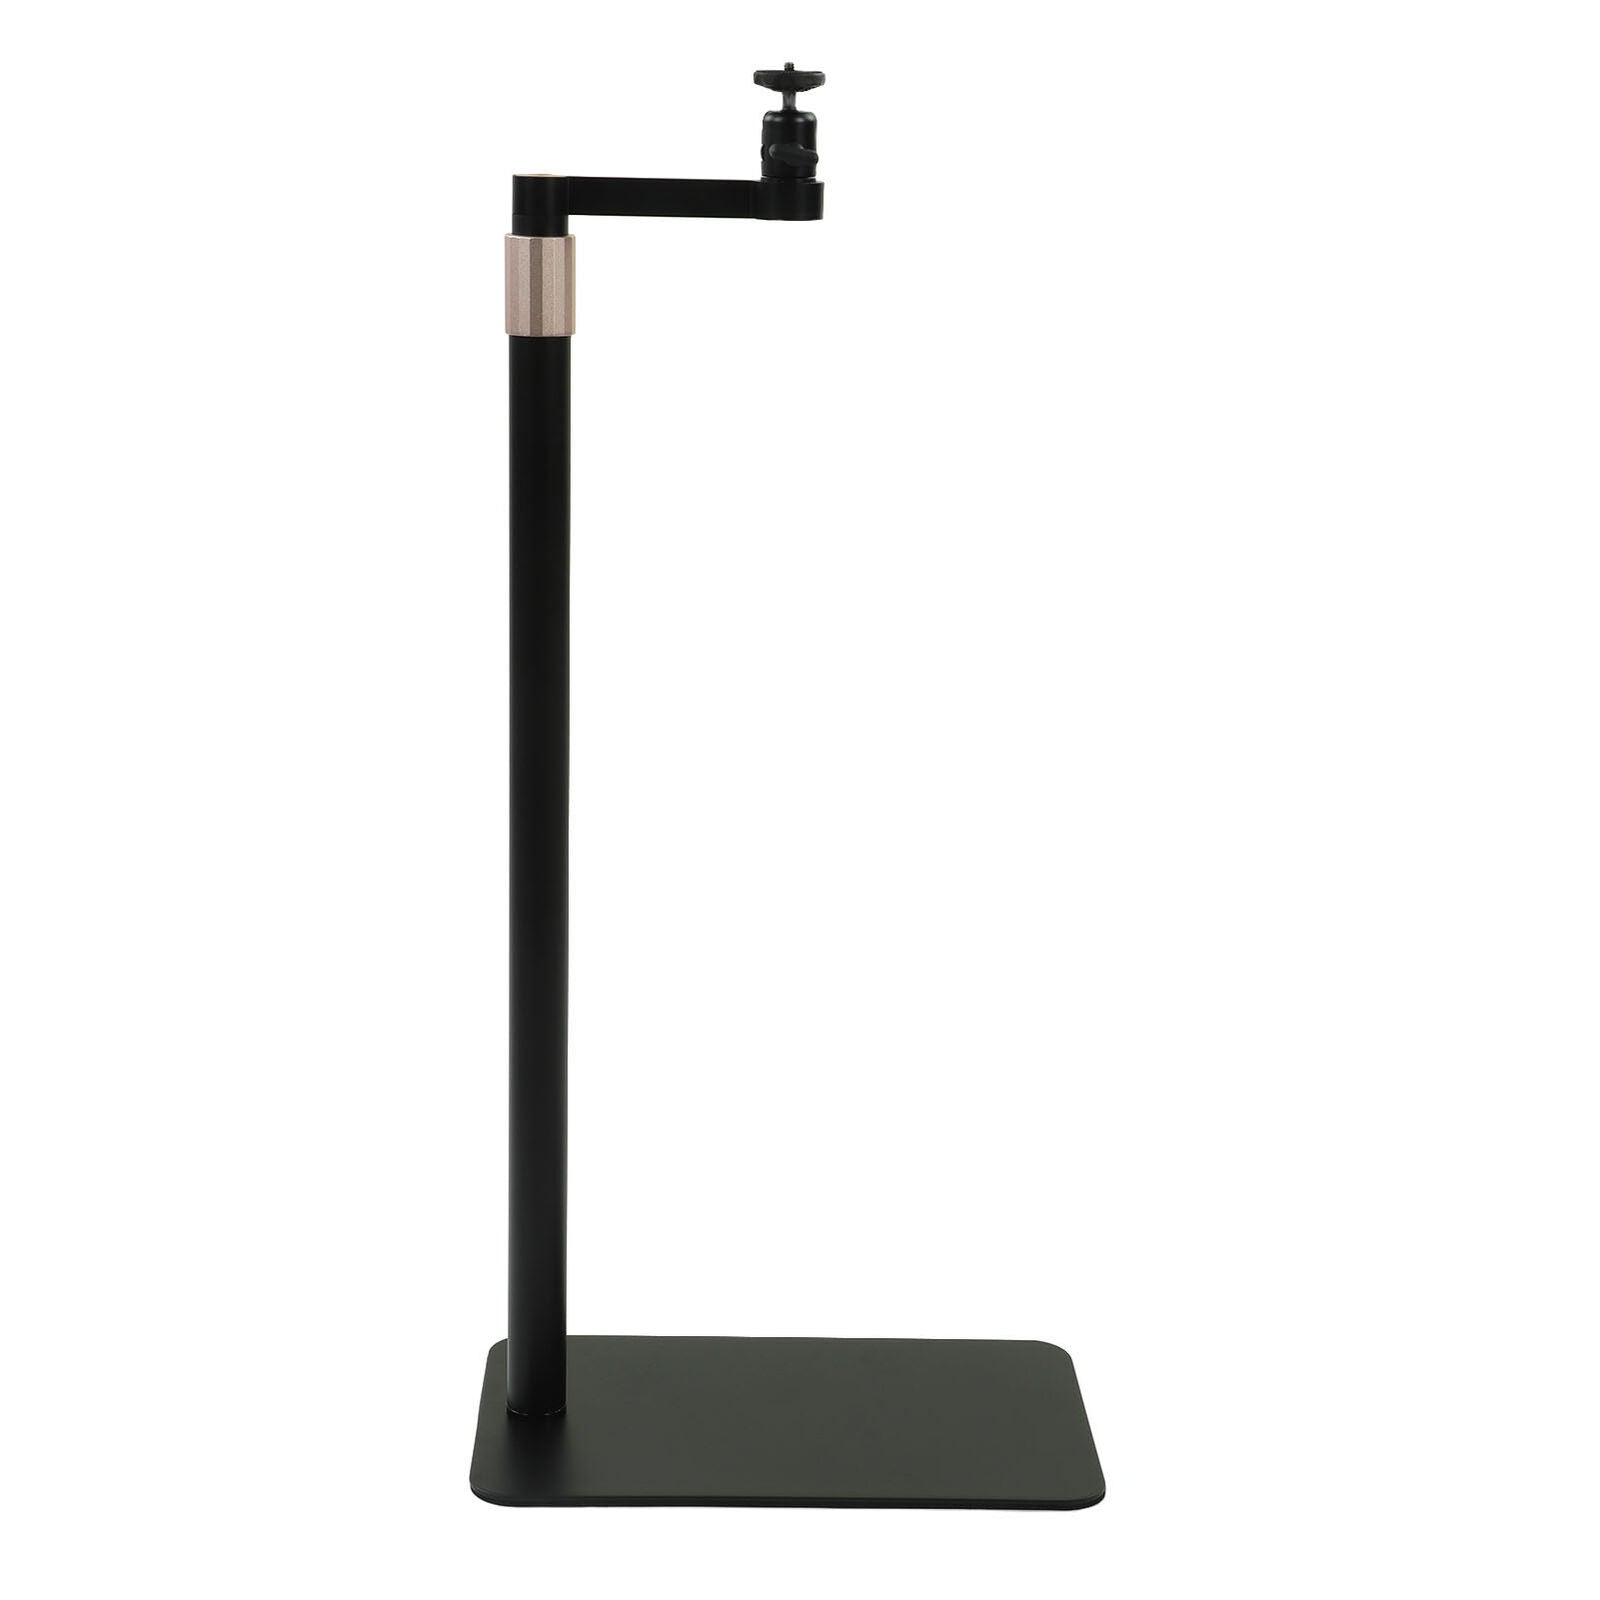 L25 Pro Universal gimbal projector stand